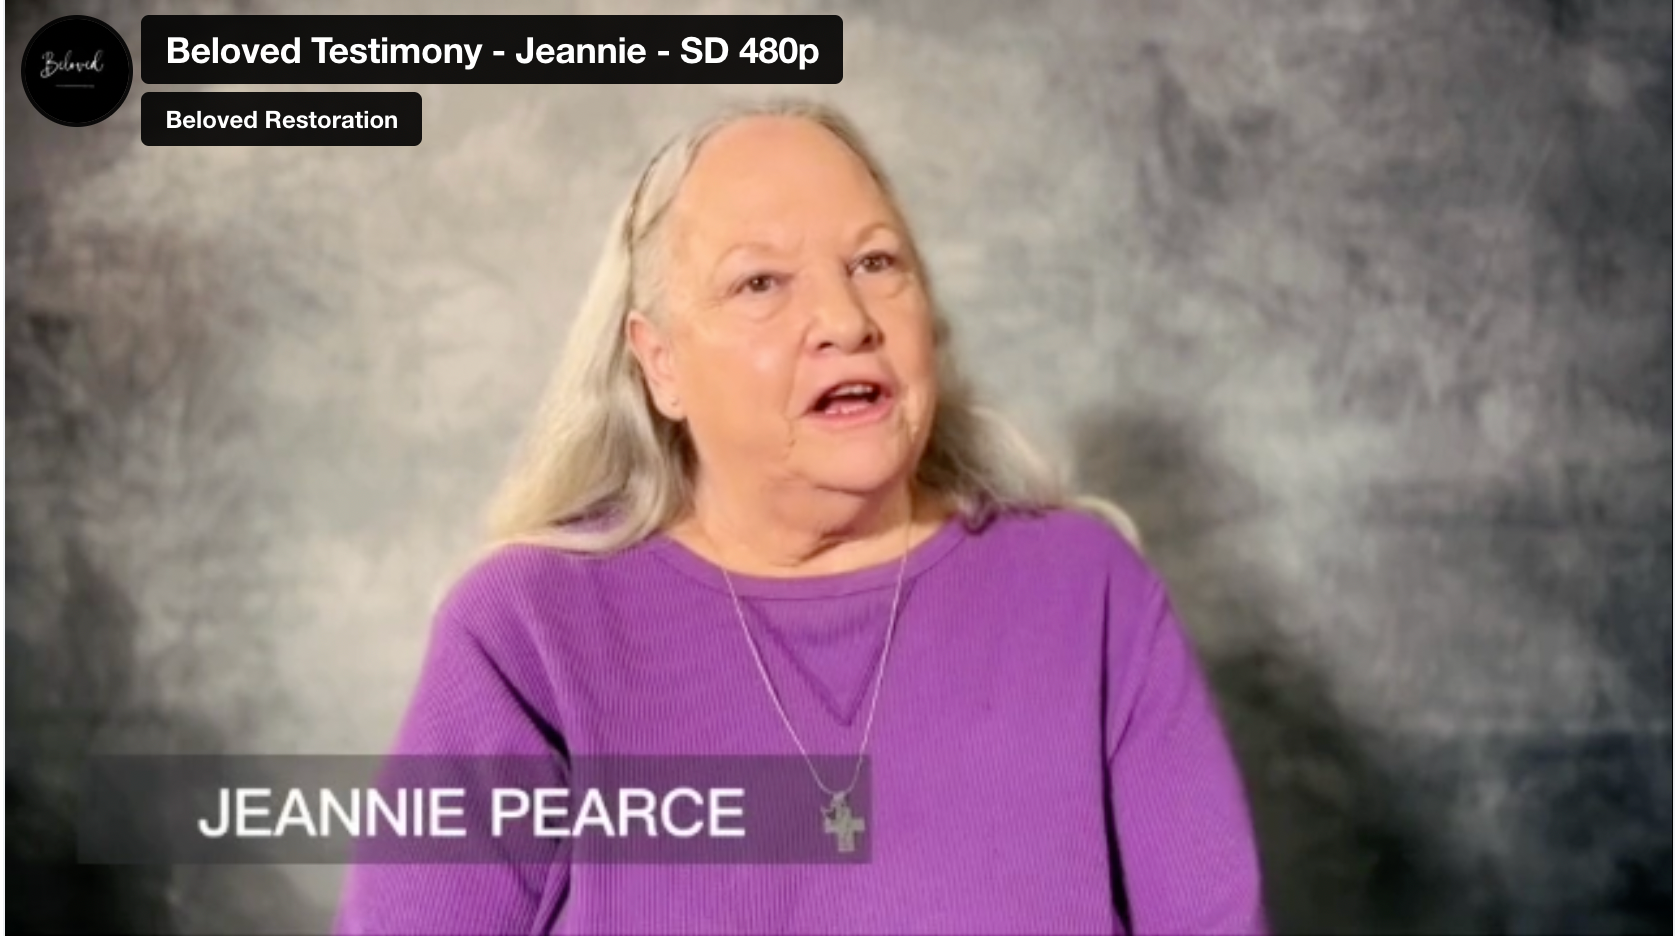 Load video: Twin Lakes Beloved Testimony - Jeannie